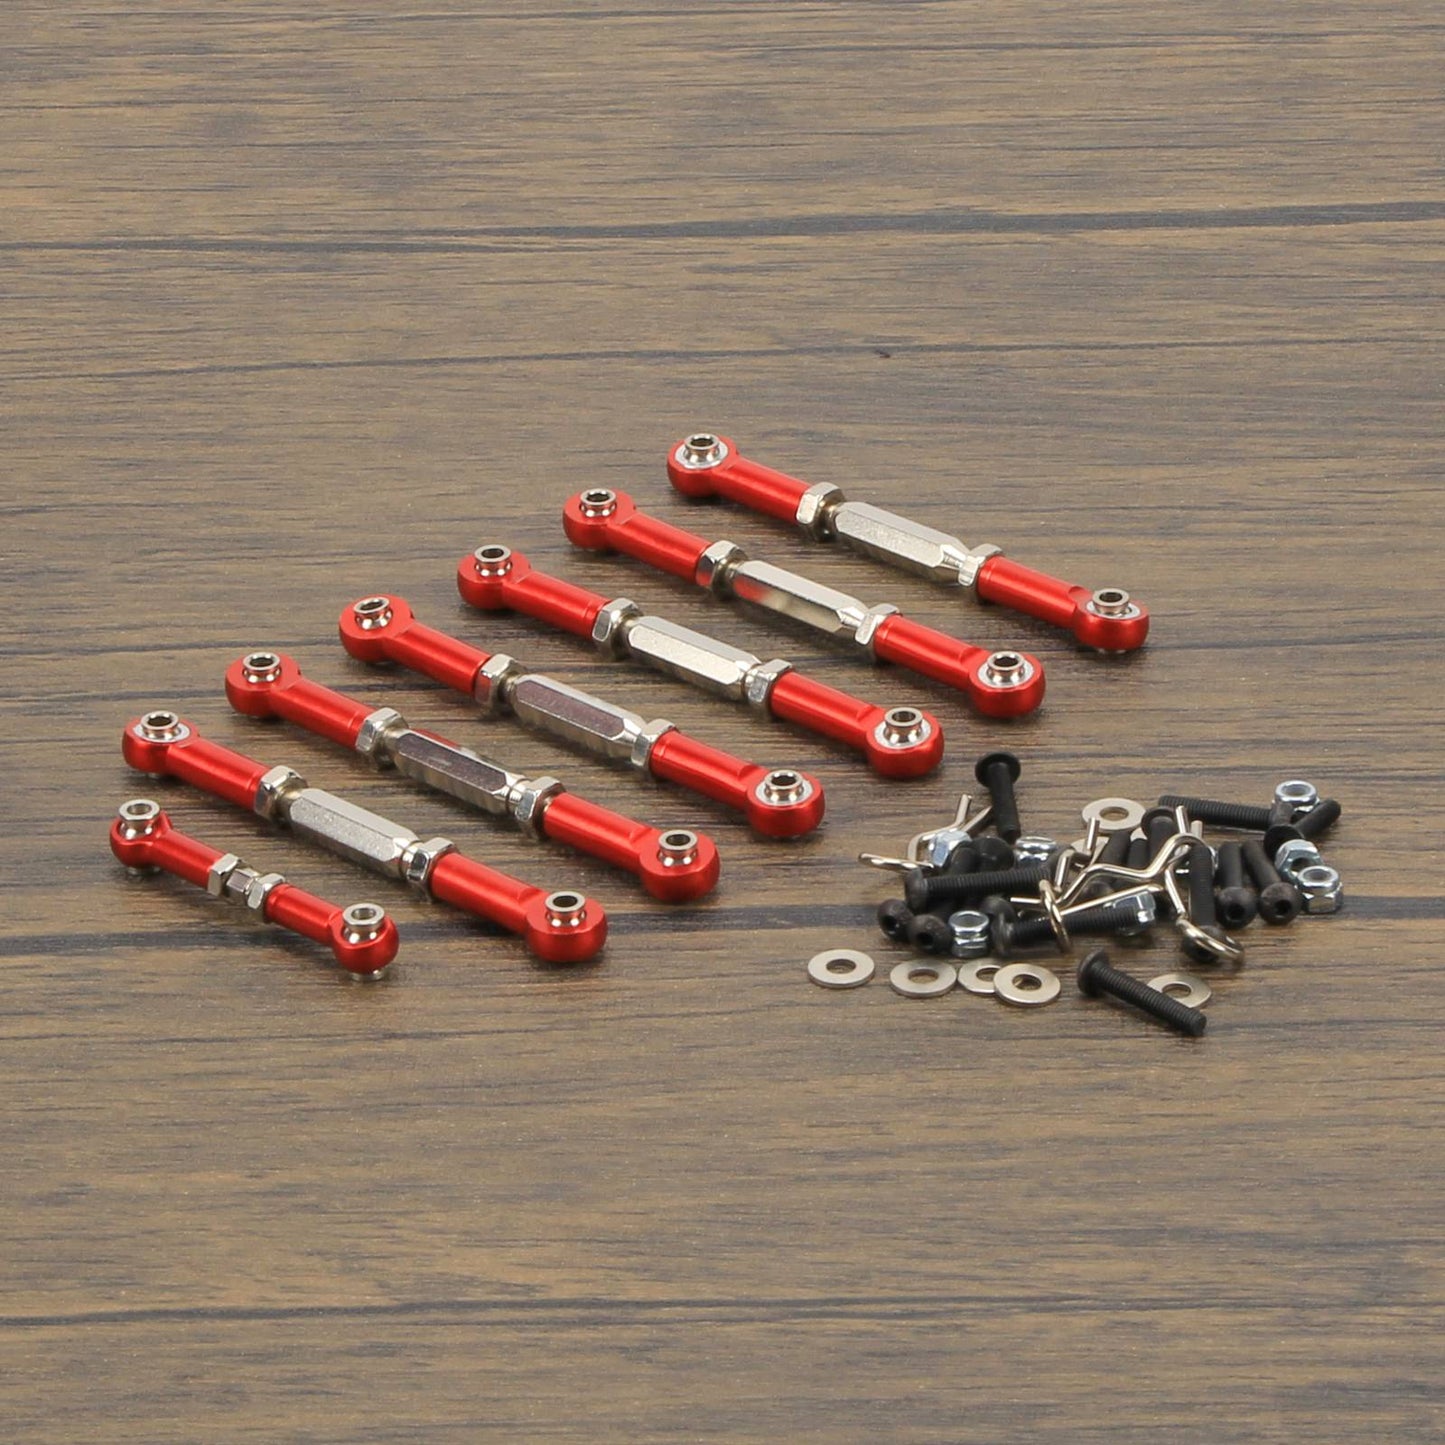 RCAWD HPI Venture Toyota FJ Cruiser crawler Red RCAWD RC Steering Link Set 7pcs for 1/10 Traxxas Slash 4wd Upgrades